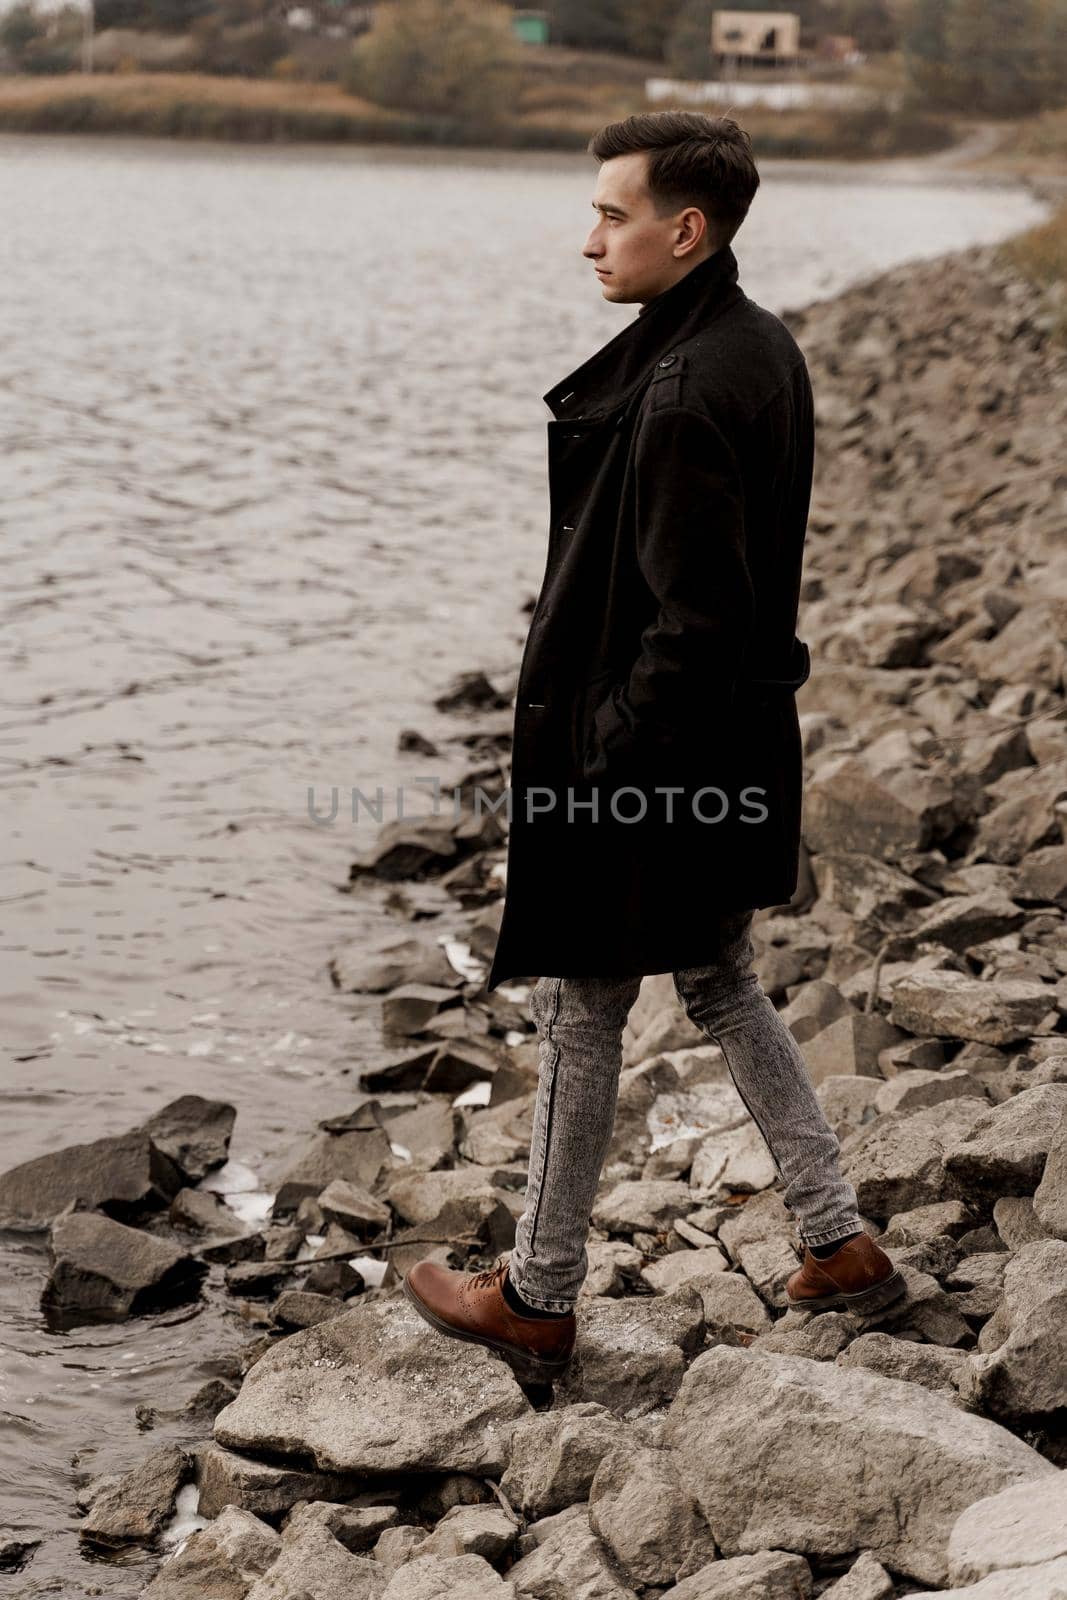 Confident business man walks near lake and thinks about his business during quarantine coronavirus covid-19 period. Handsome male weared formal black coat